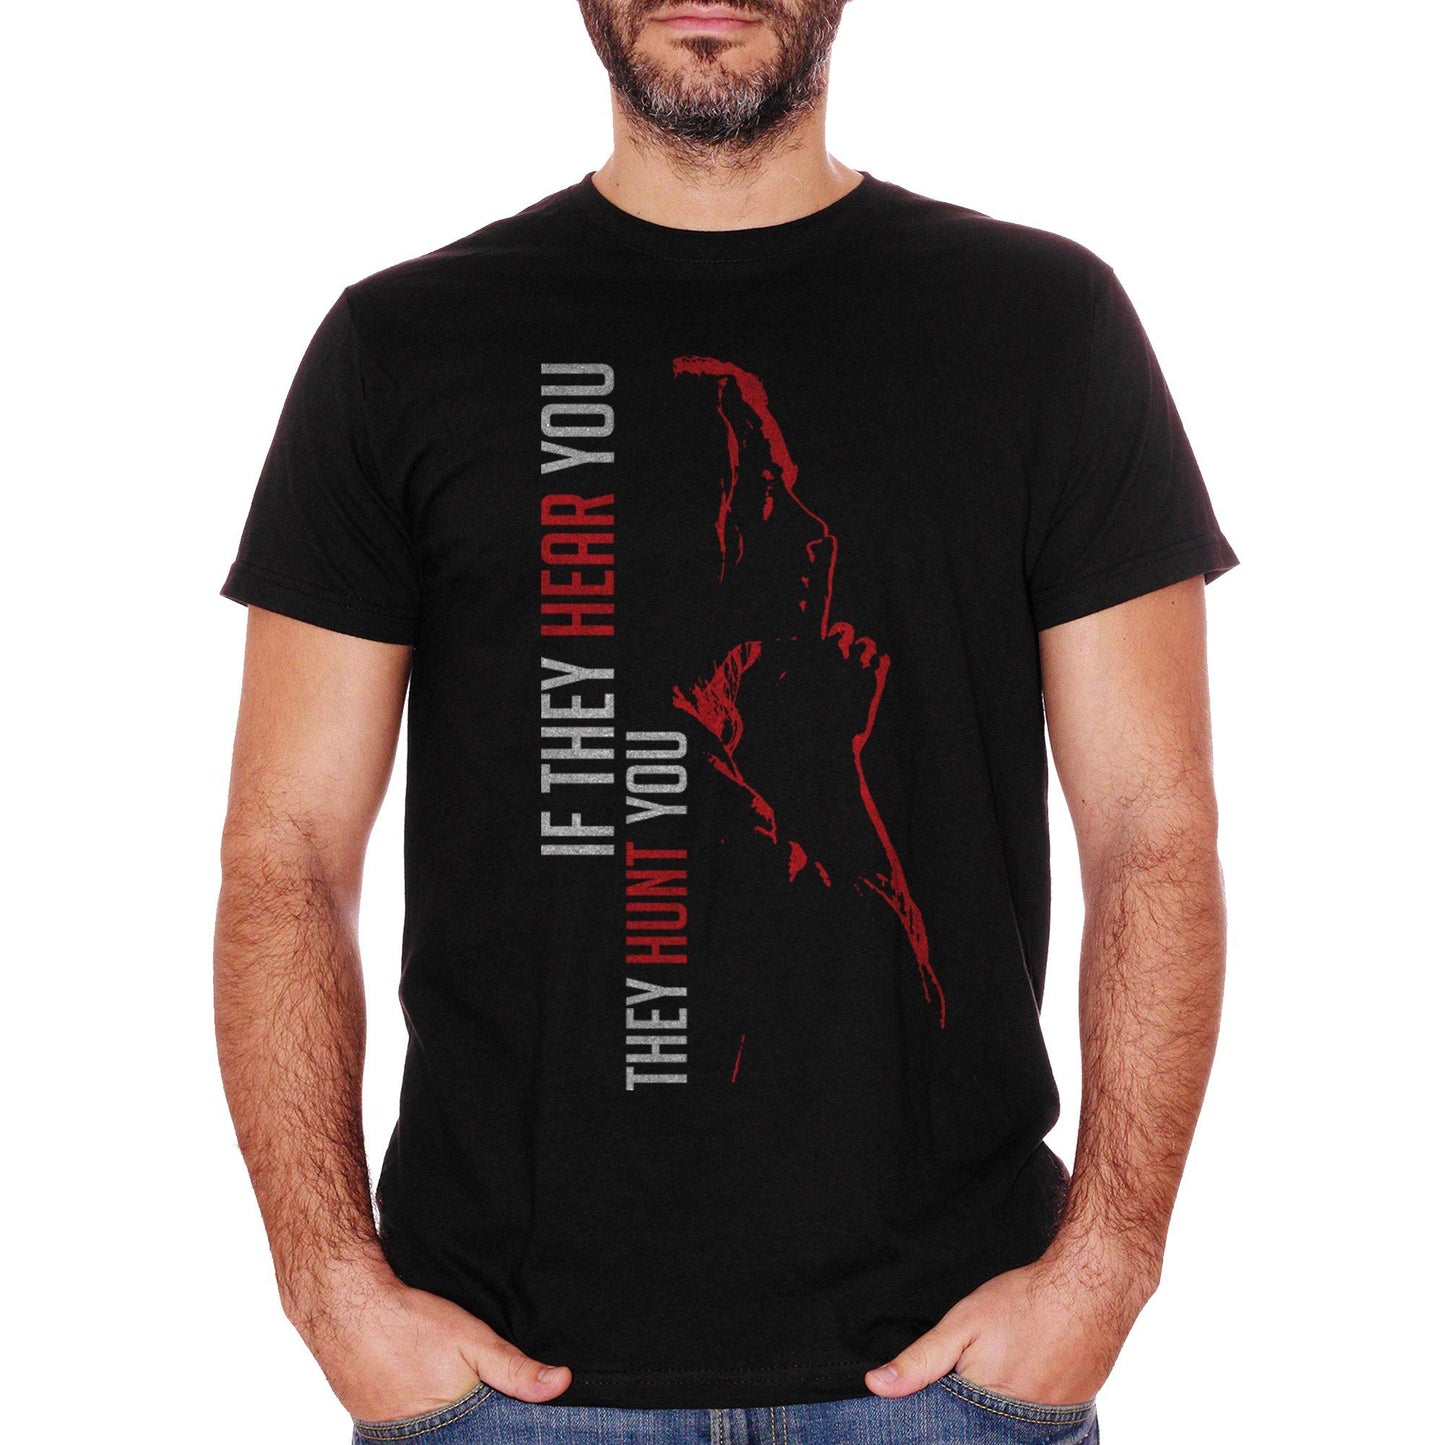 Black T-Shirt A Quiet Place Horror Movie If They Hear You They Hunt You - FILM CucShop